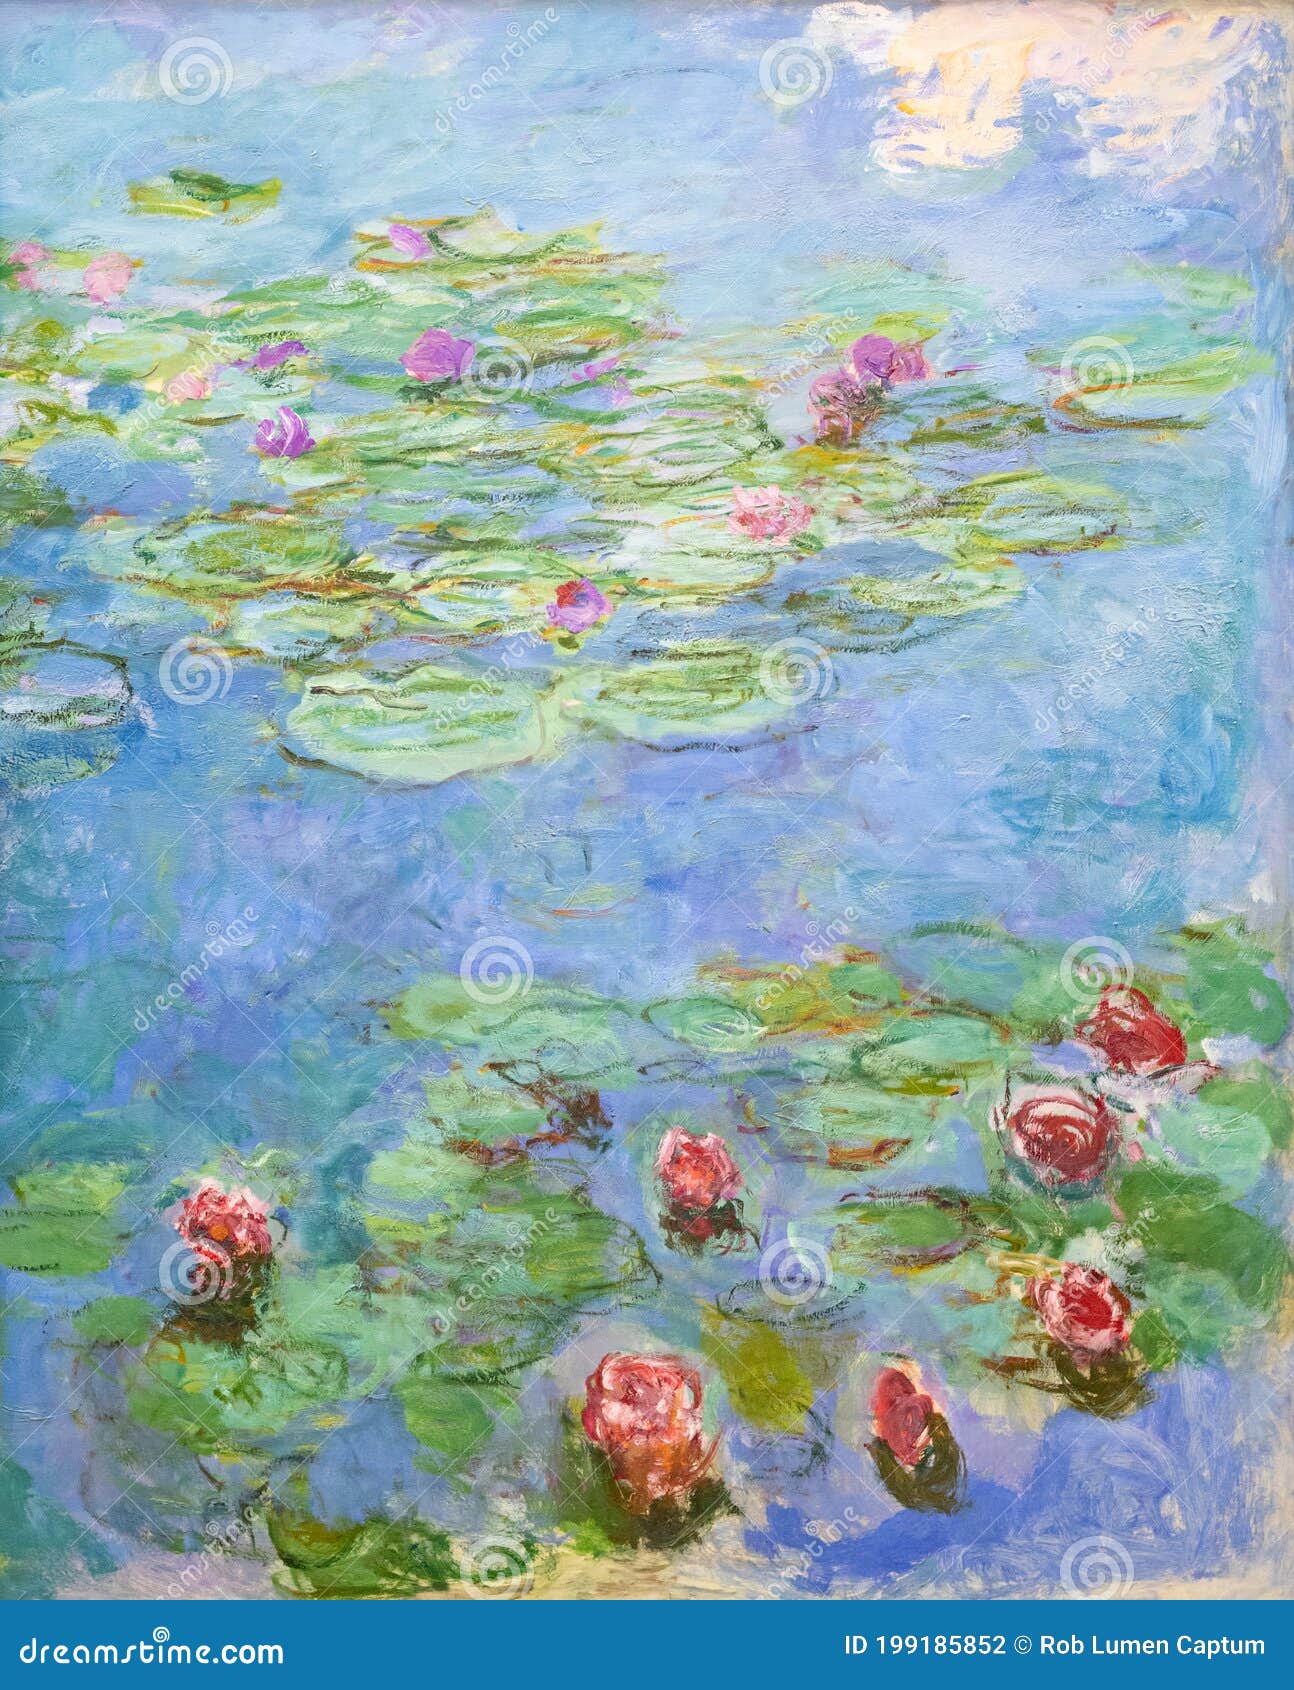 water-lilies, giverny by impressionist claude monet